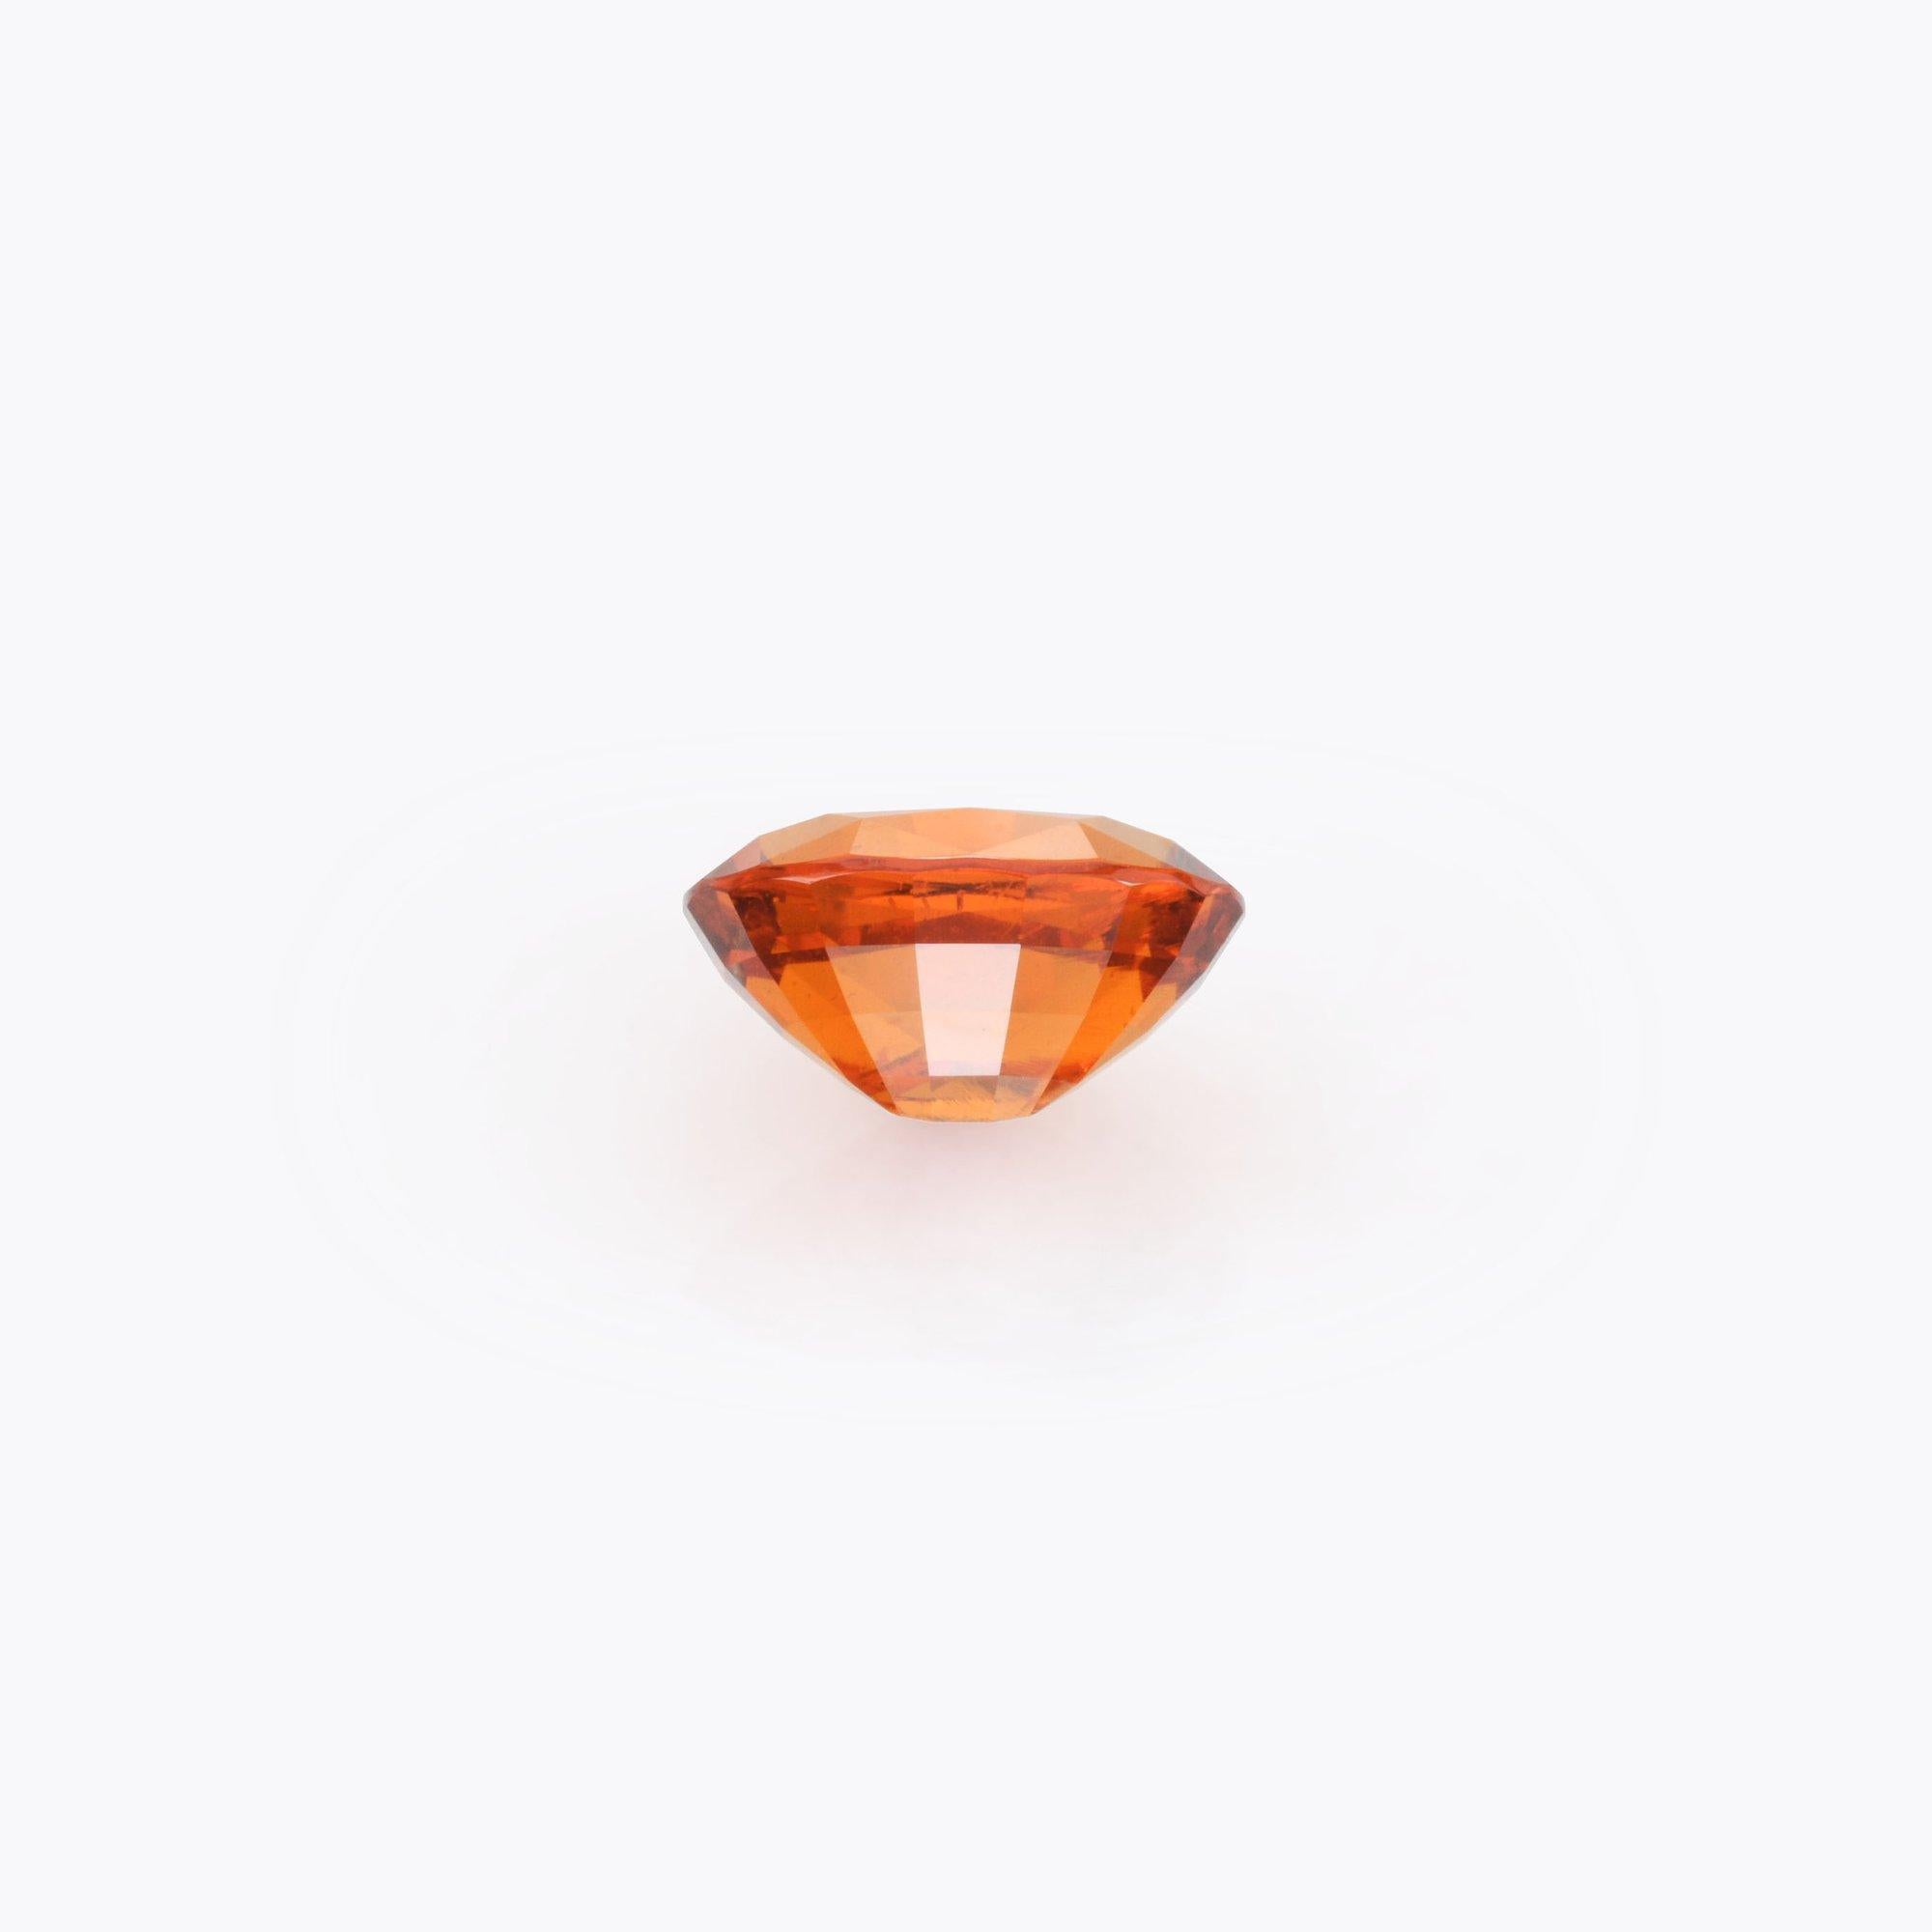 Vibrant 7.41 carat Mandarin Garnet oval gem offered loose to a lady or gentleman.
Returns are accepted and paid by us within 7 days of delivery.
We offer supreme custom jewelry work upon request. Please contact us for more details.
(Rings, Earrings,